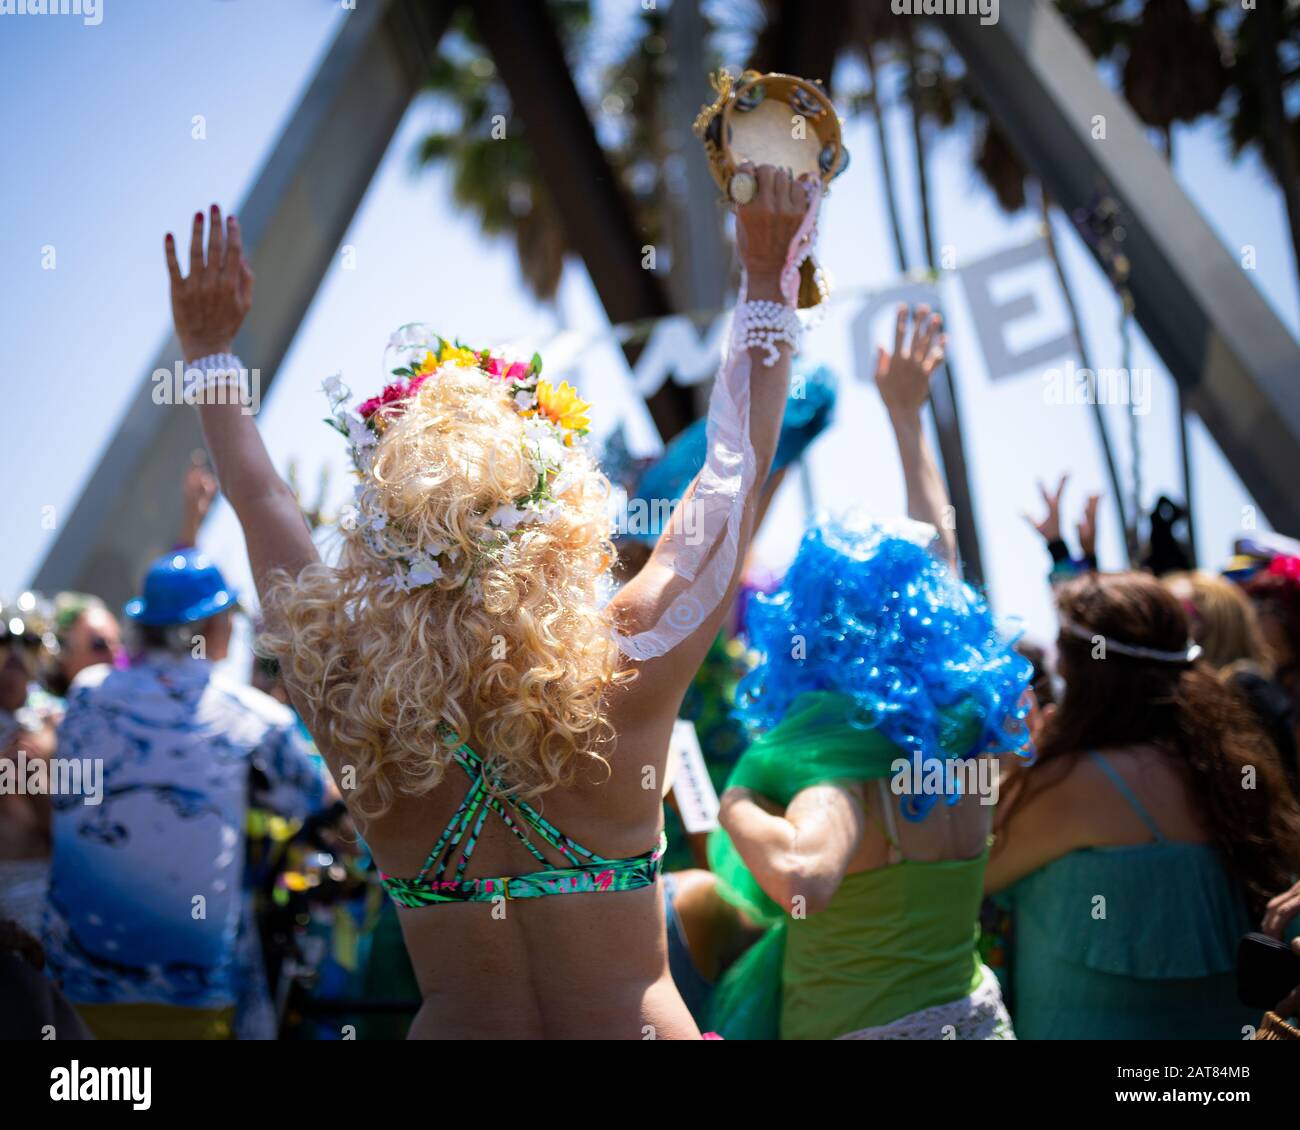 Festive Parade in Venice Beach, California with Blonde Female in Bikini Top Holding Up Arms and is holding a tambourine in one hand. Stock Photo